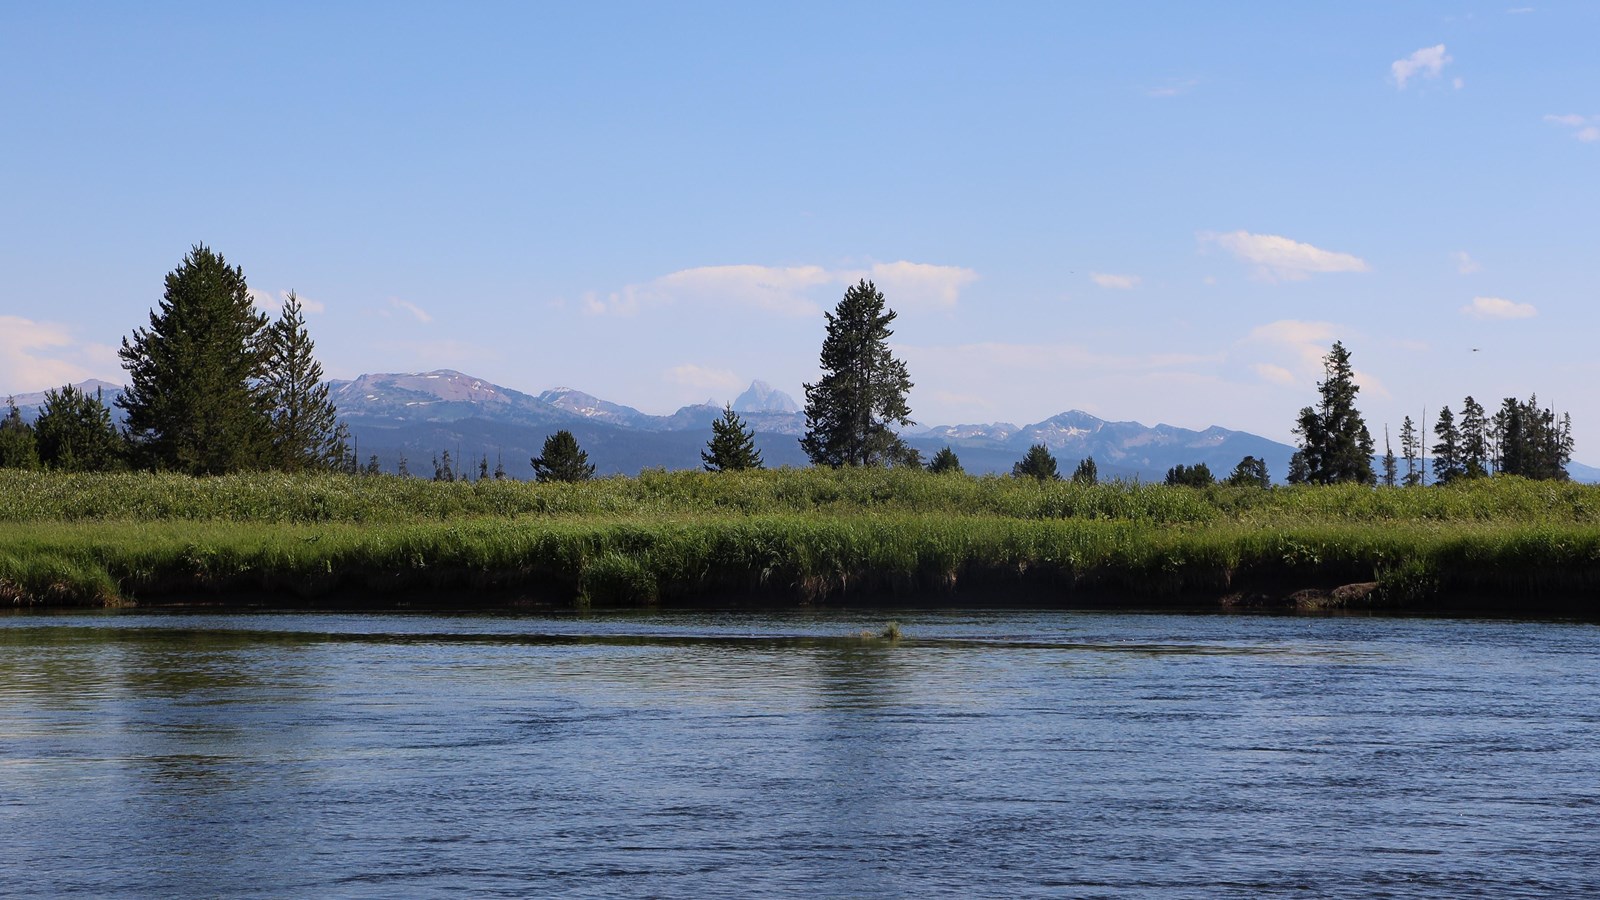 A river flows along a bank covered in tall grasses. A mountain range rises in the distance.